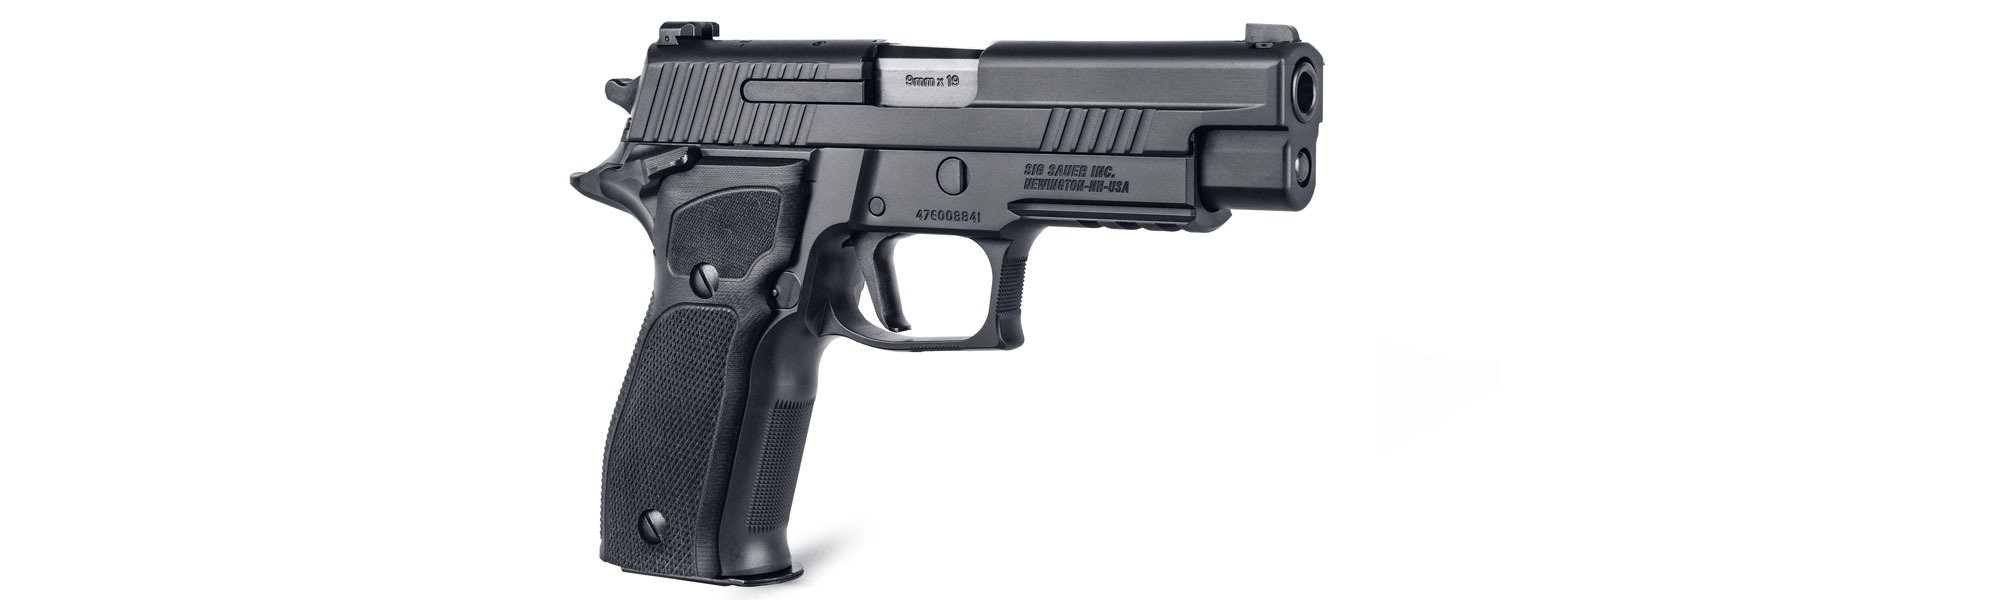 The P226 Legion is featured as a 9mm, full size pistol.